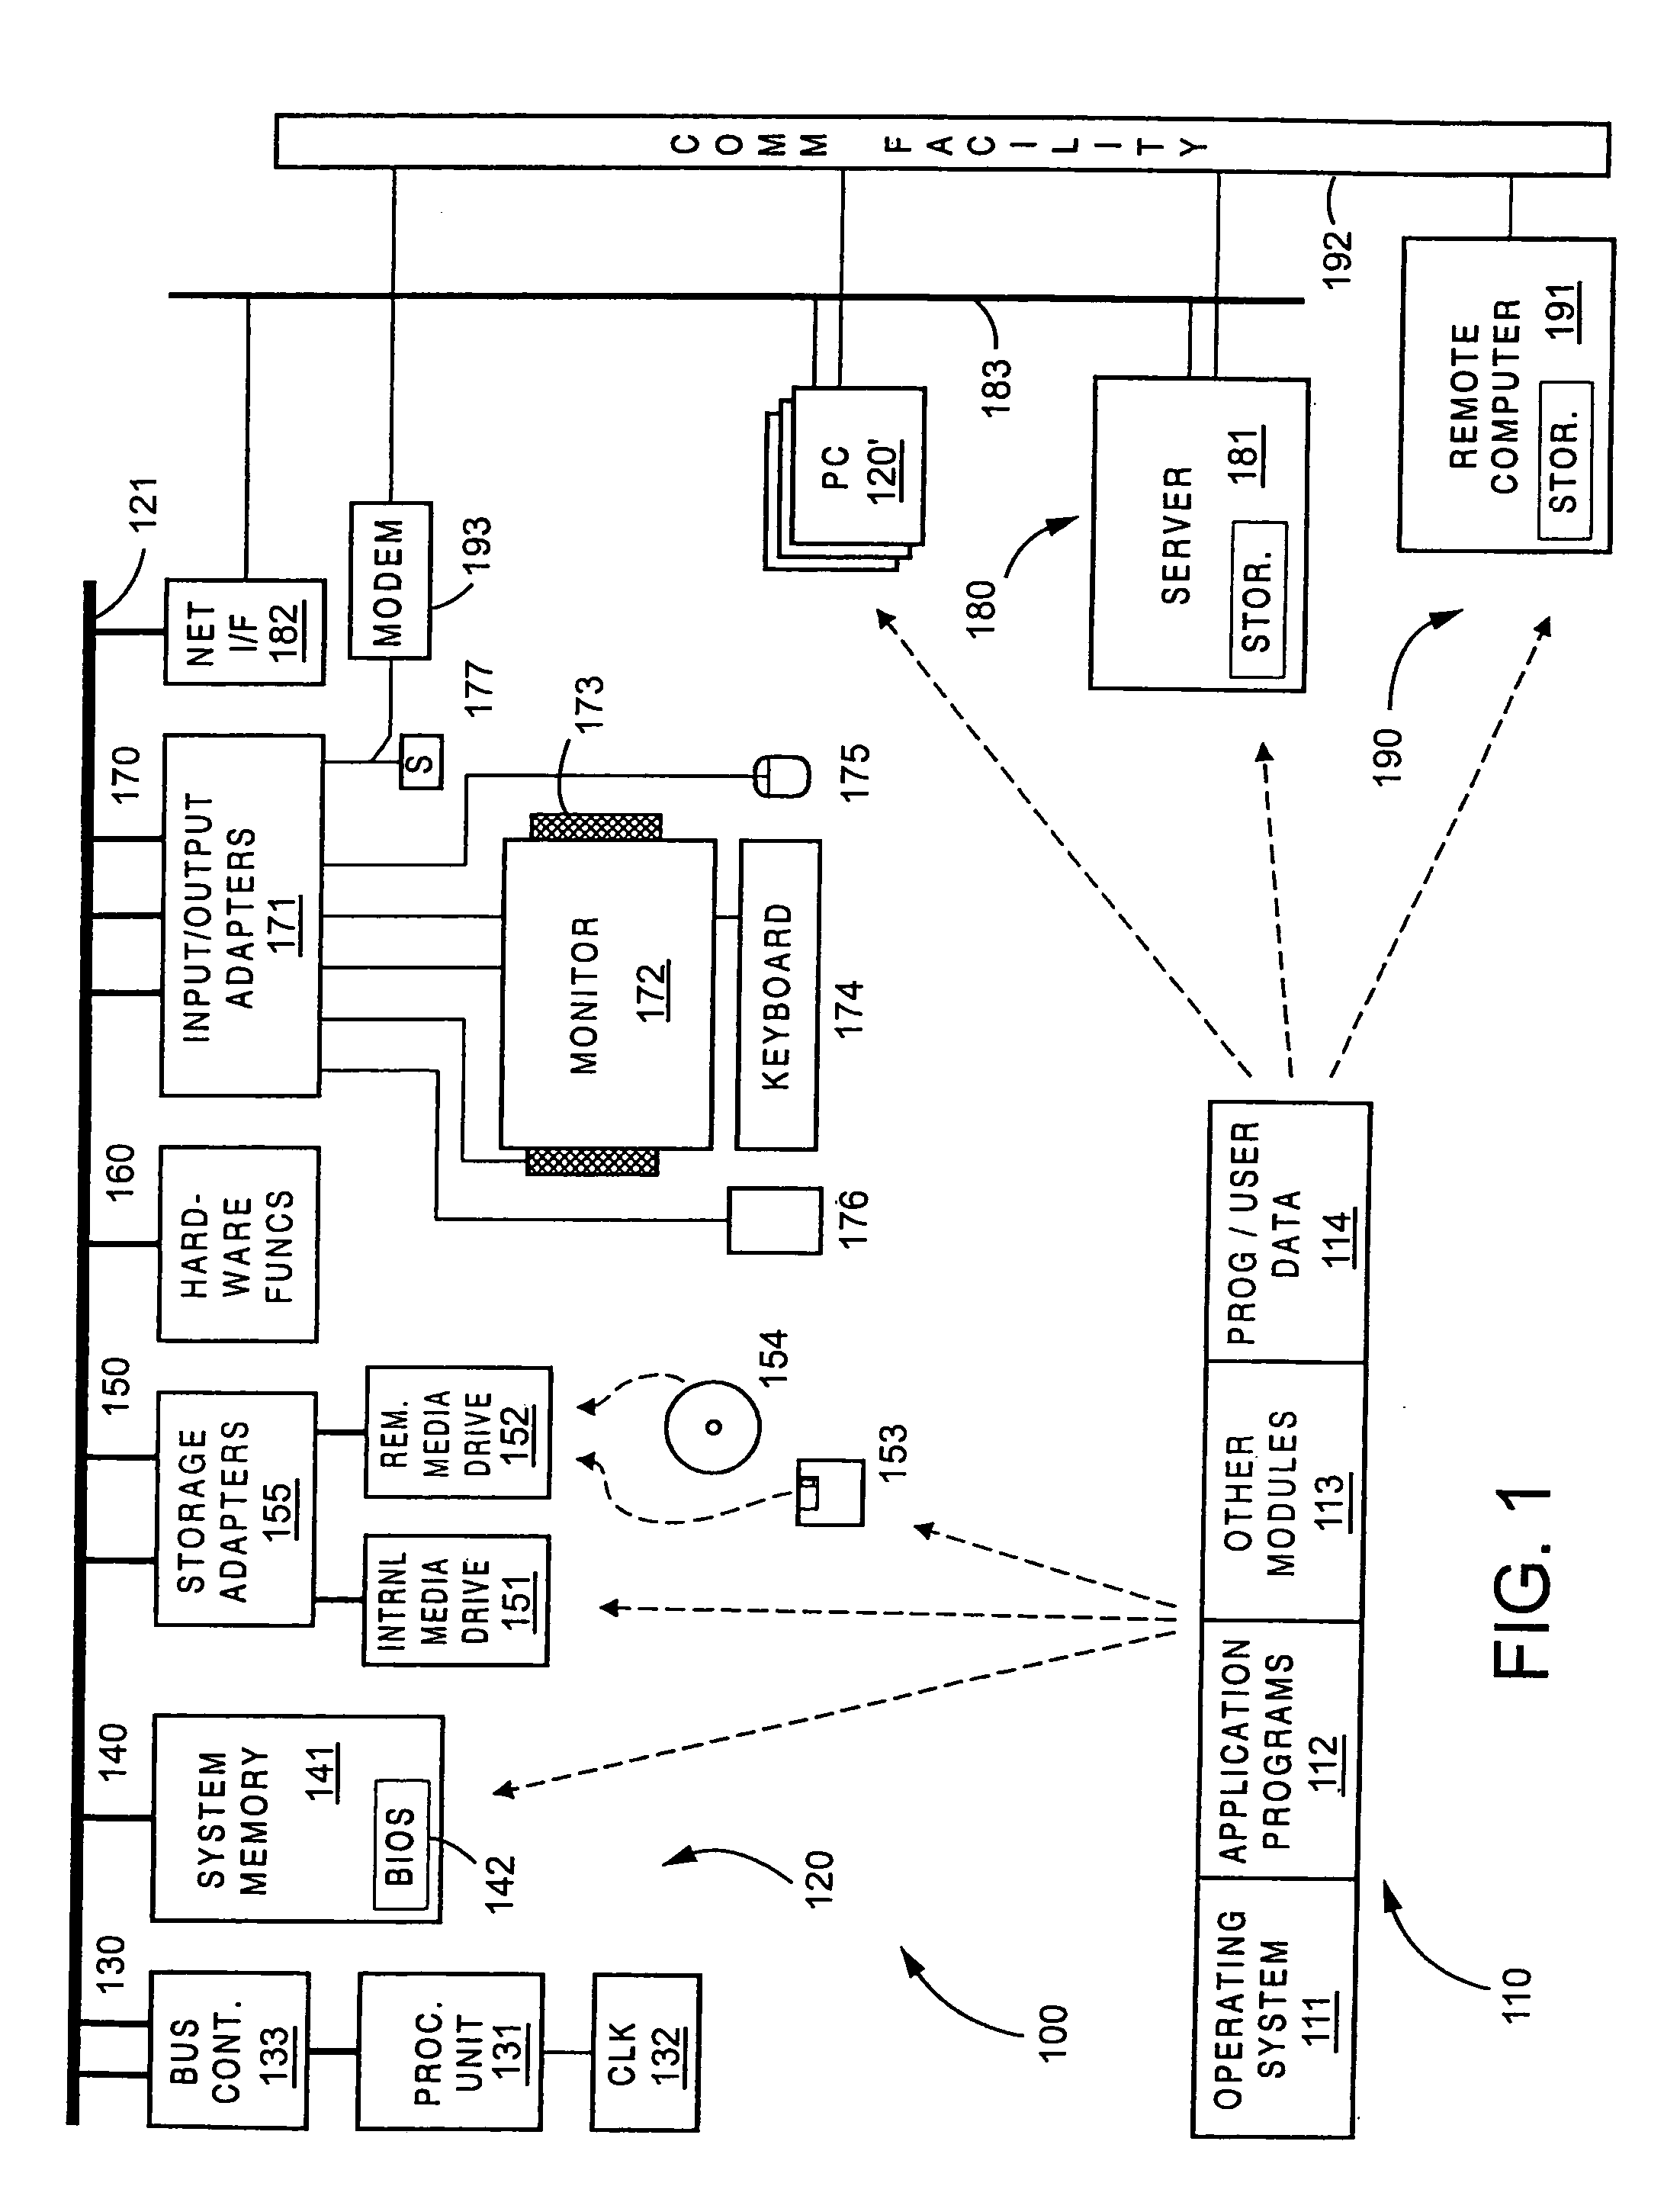 Efficient splitting and mixing of streaming-data frames for processing through multiple processing modules